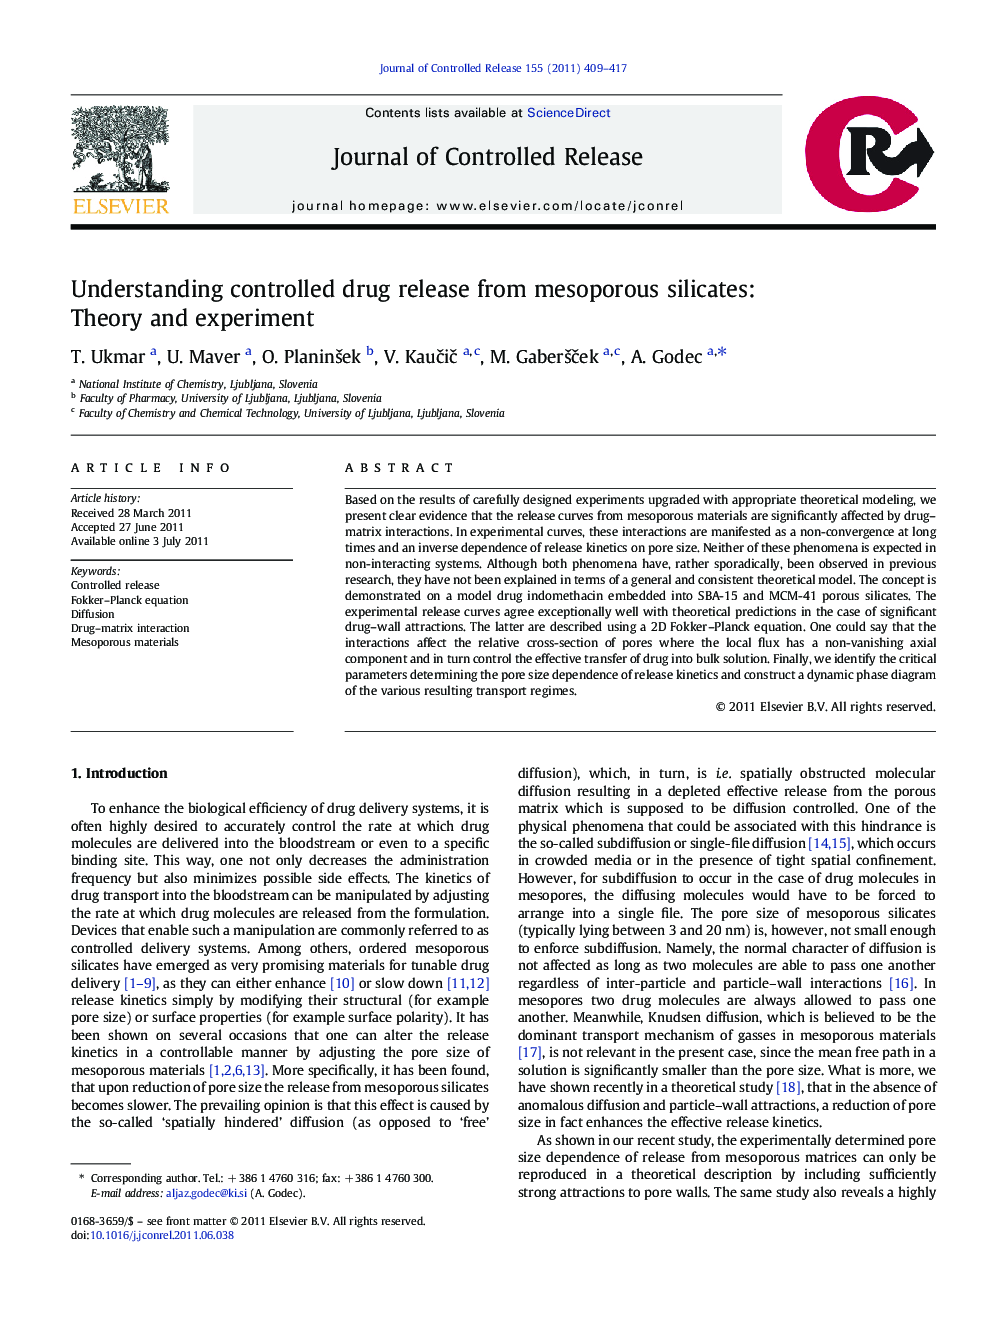 Understanding controlled drug release from mesoporous silicates: Theory and experiment